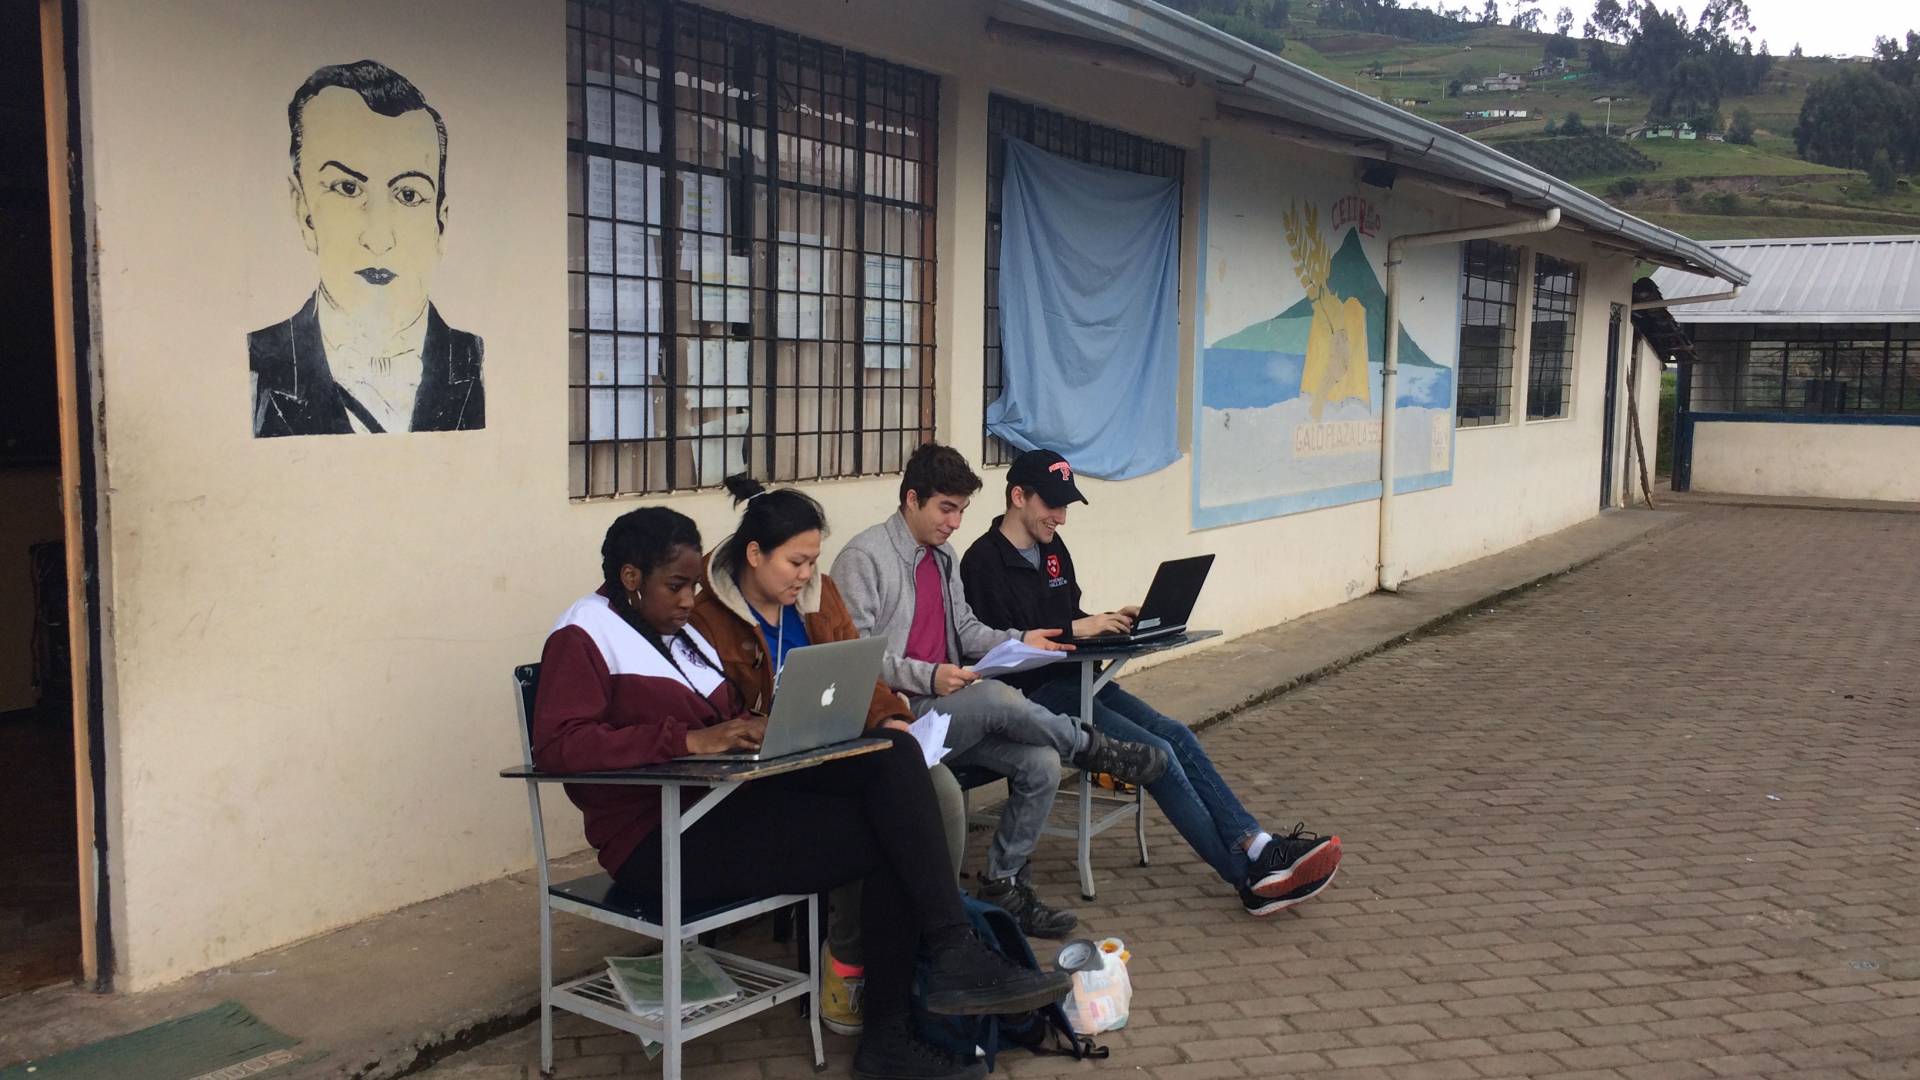 Students working on laptops outside in Ecuador